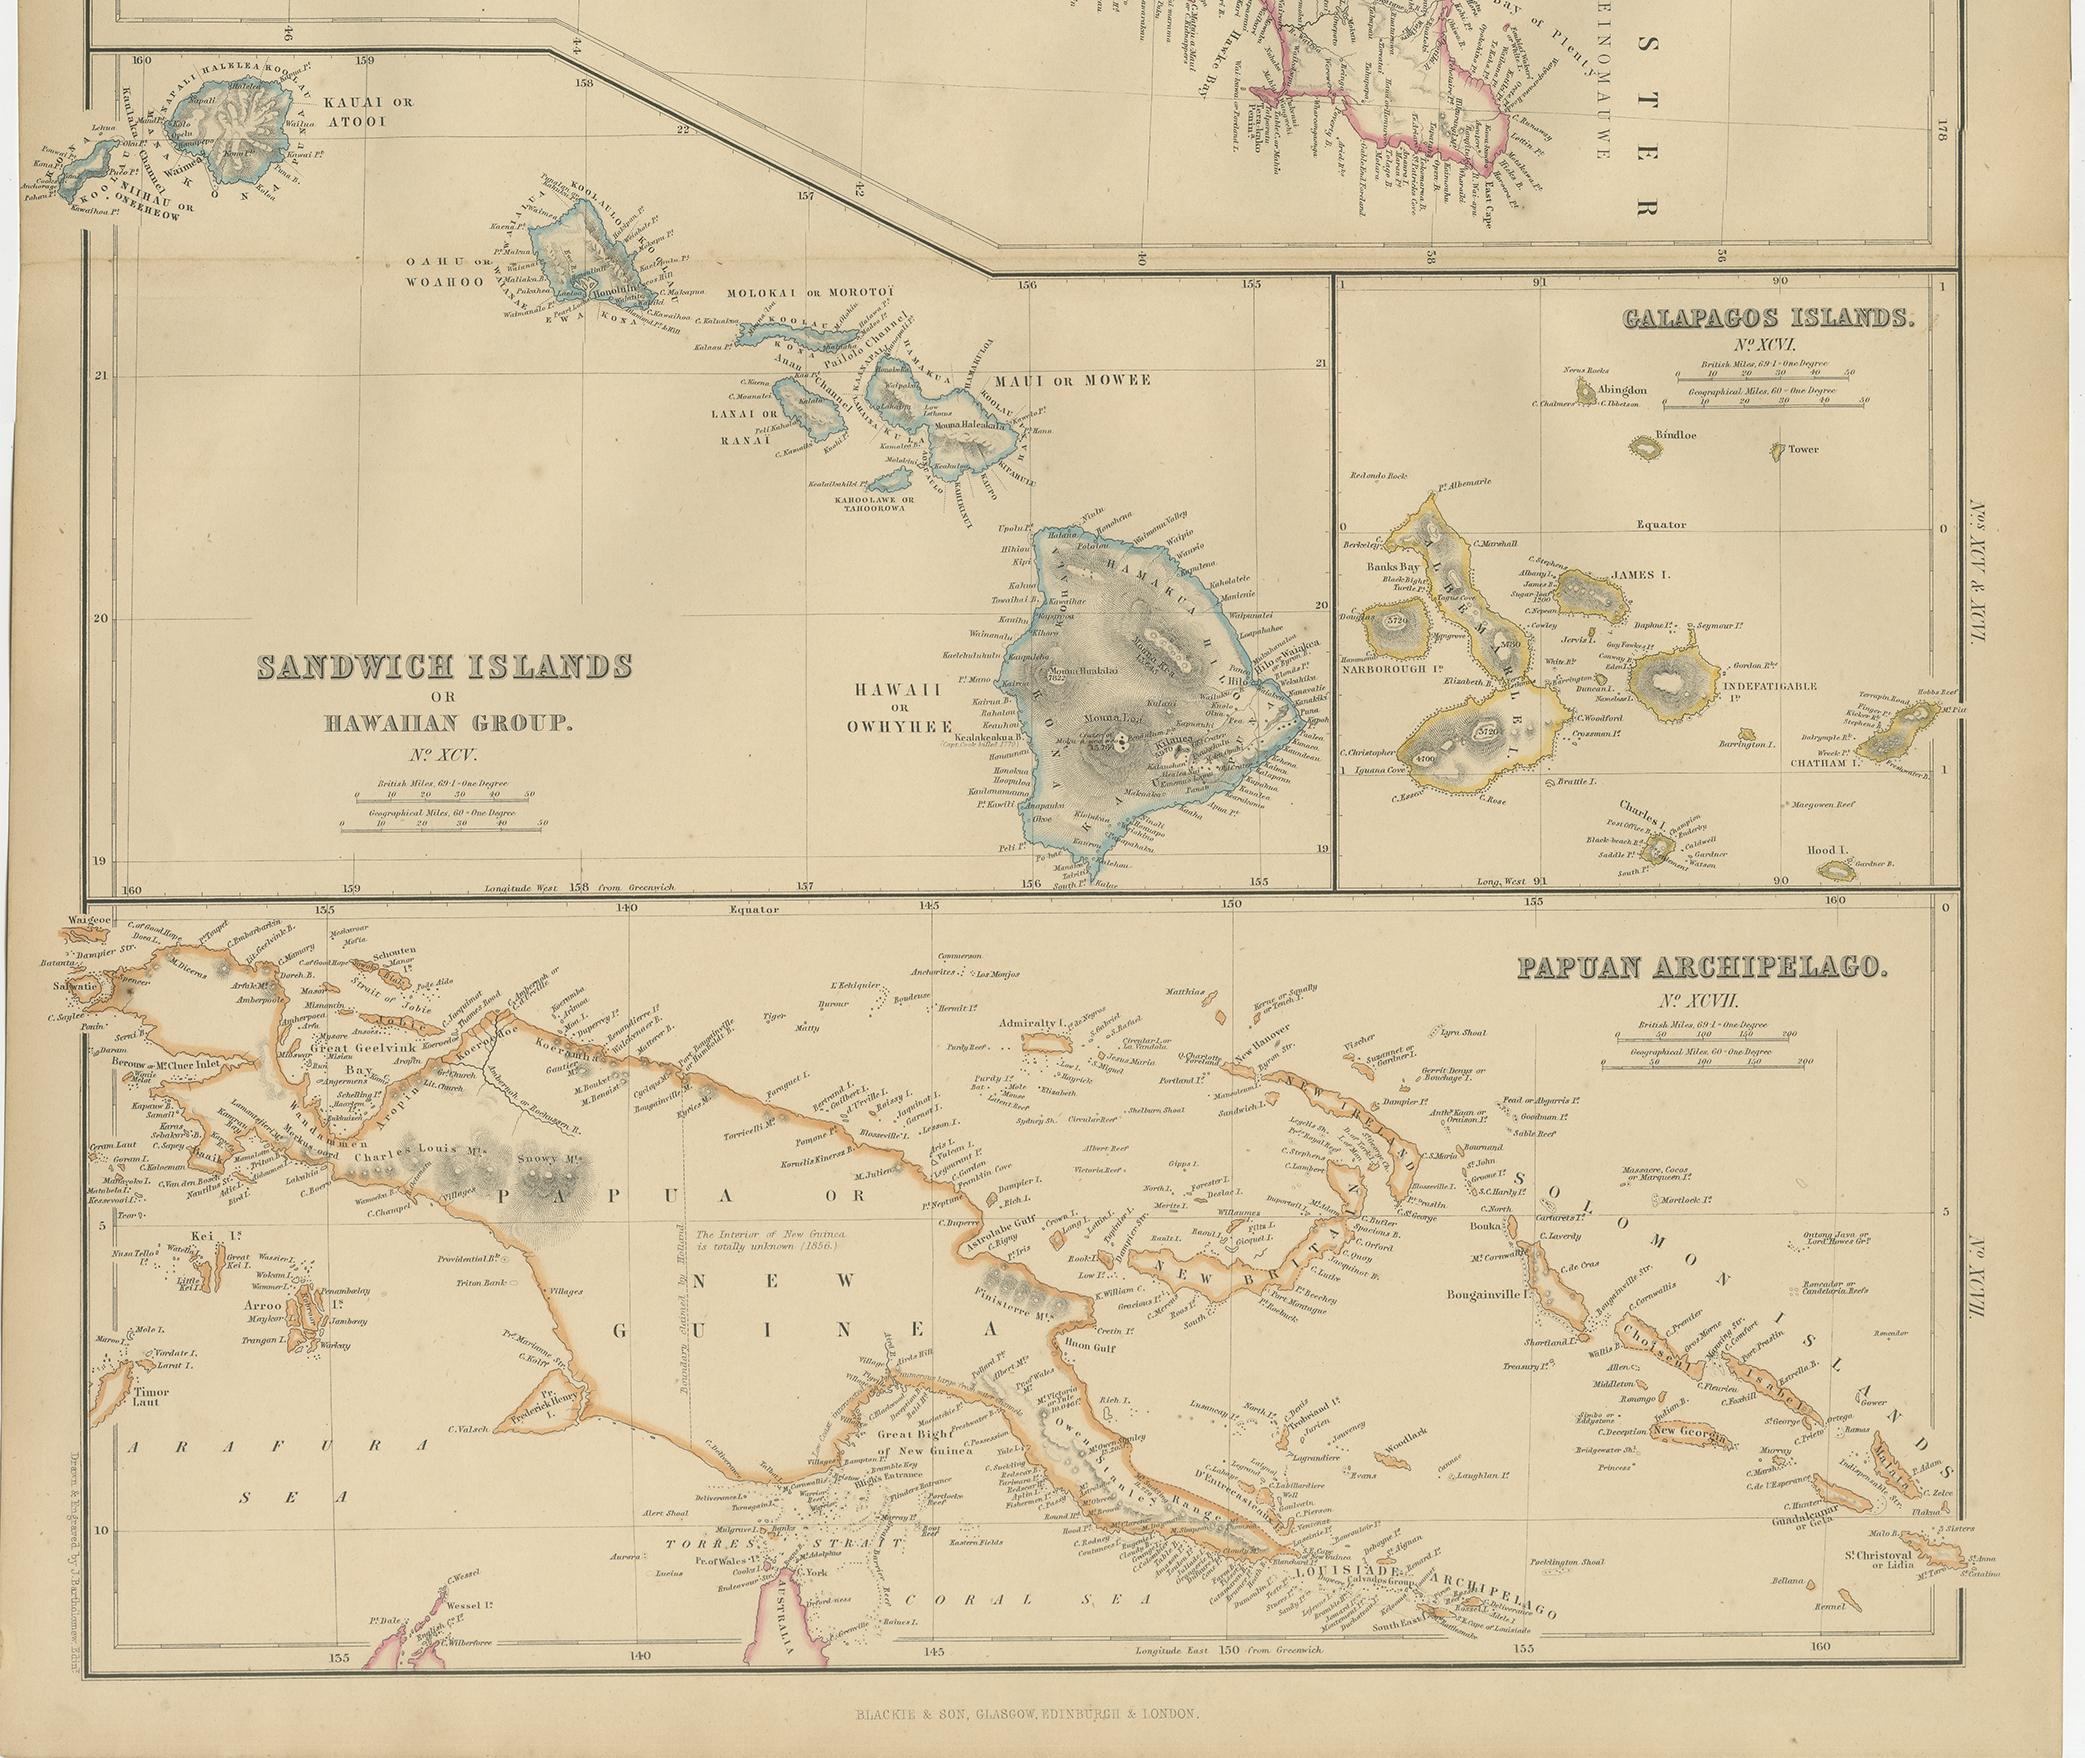 Antique map titled 'New Zealand'. Original antique map of New Zealand included map of Sandwich Islands ,Galapagos Islands and Papuan Archipelago. This map originates from ‘The Imperial Atlas of Modern Geography’. Published by W. G. Blackie, 1859.